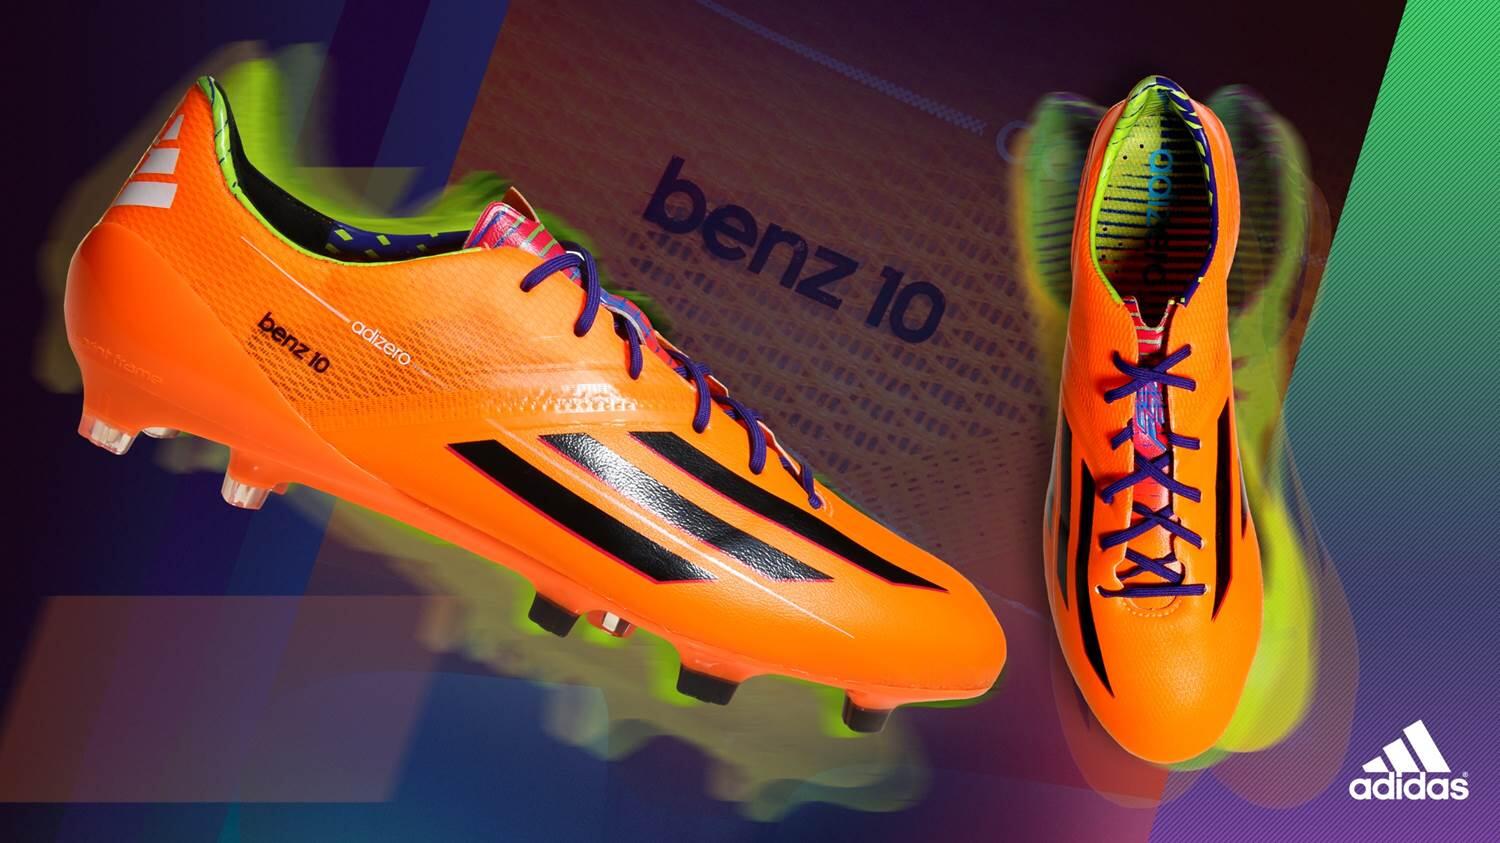 Twitter 上的 adidas Football："Fly or die Benzema! Twitter